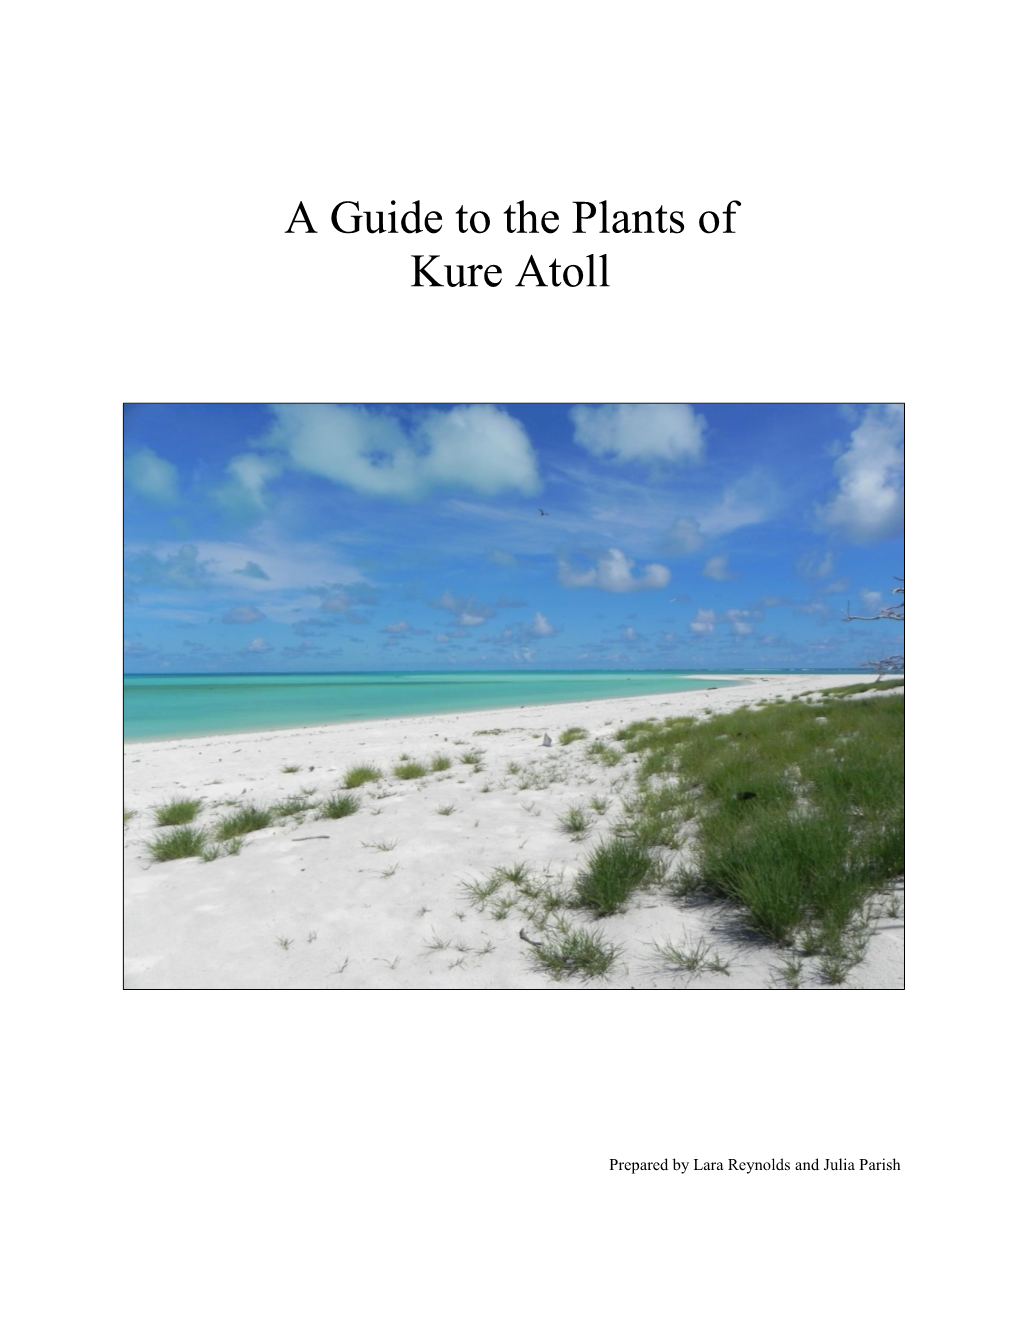 A Guide to the Plants of Kure Atoll